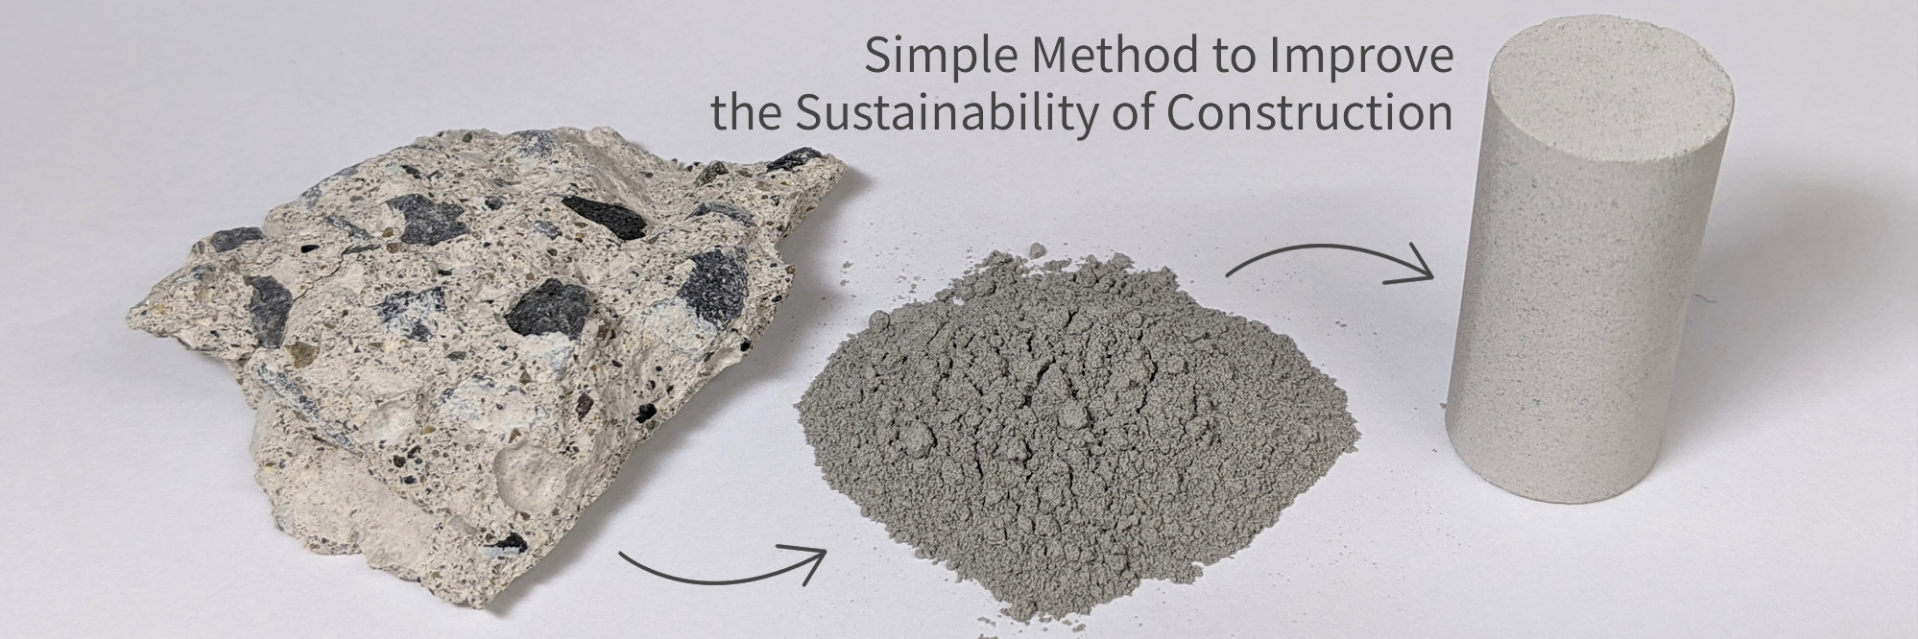 Simple Method to Improve the Sustainability of Construction